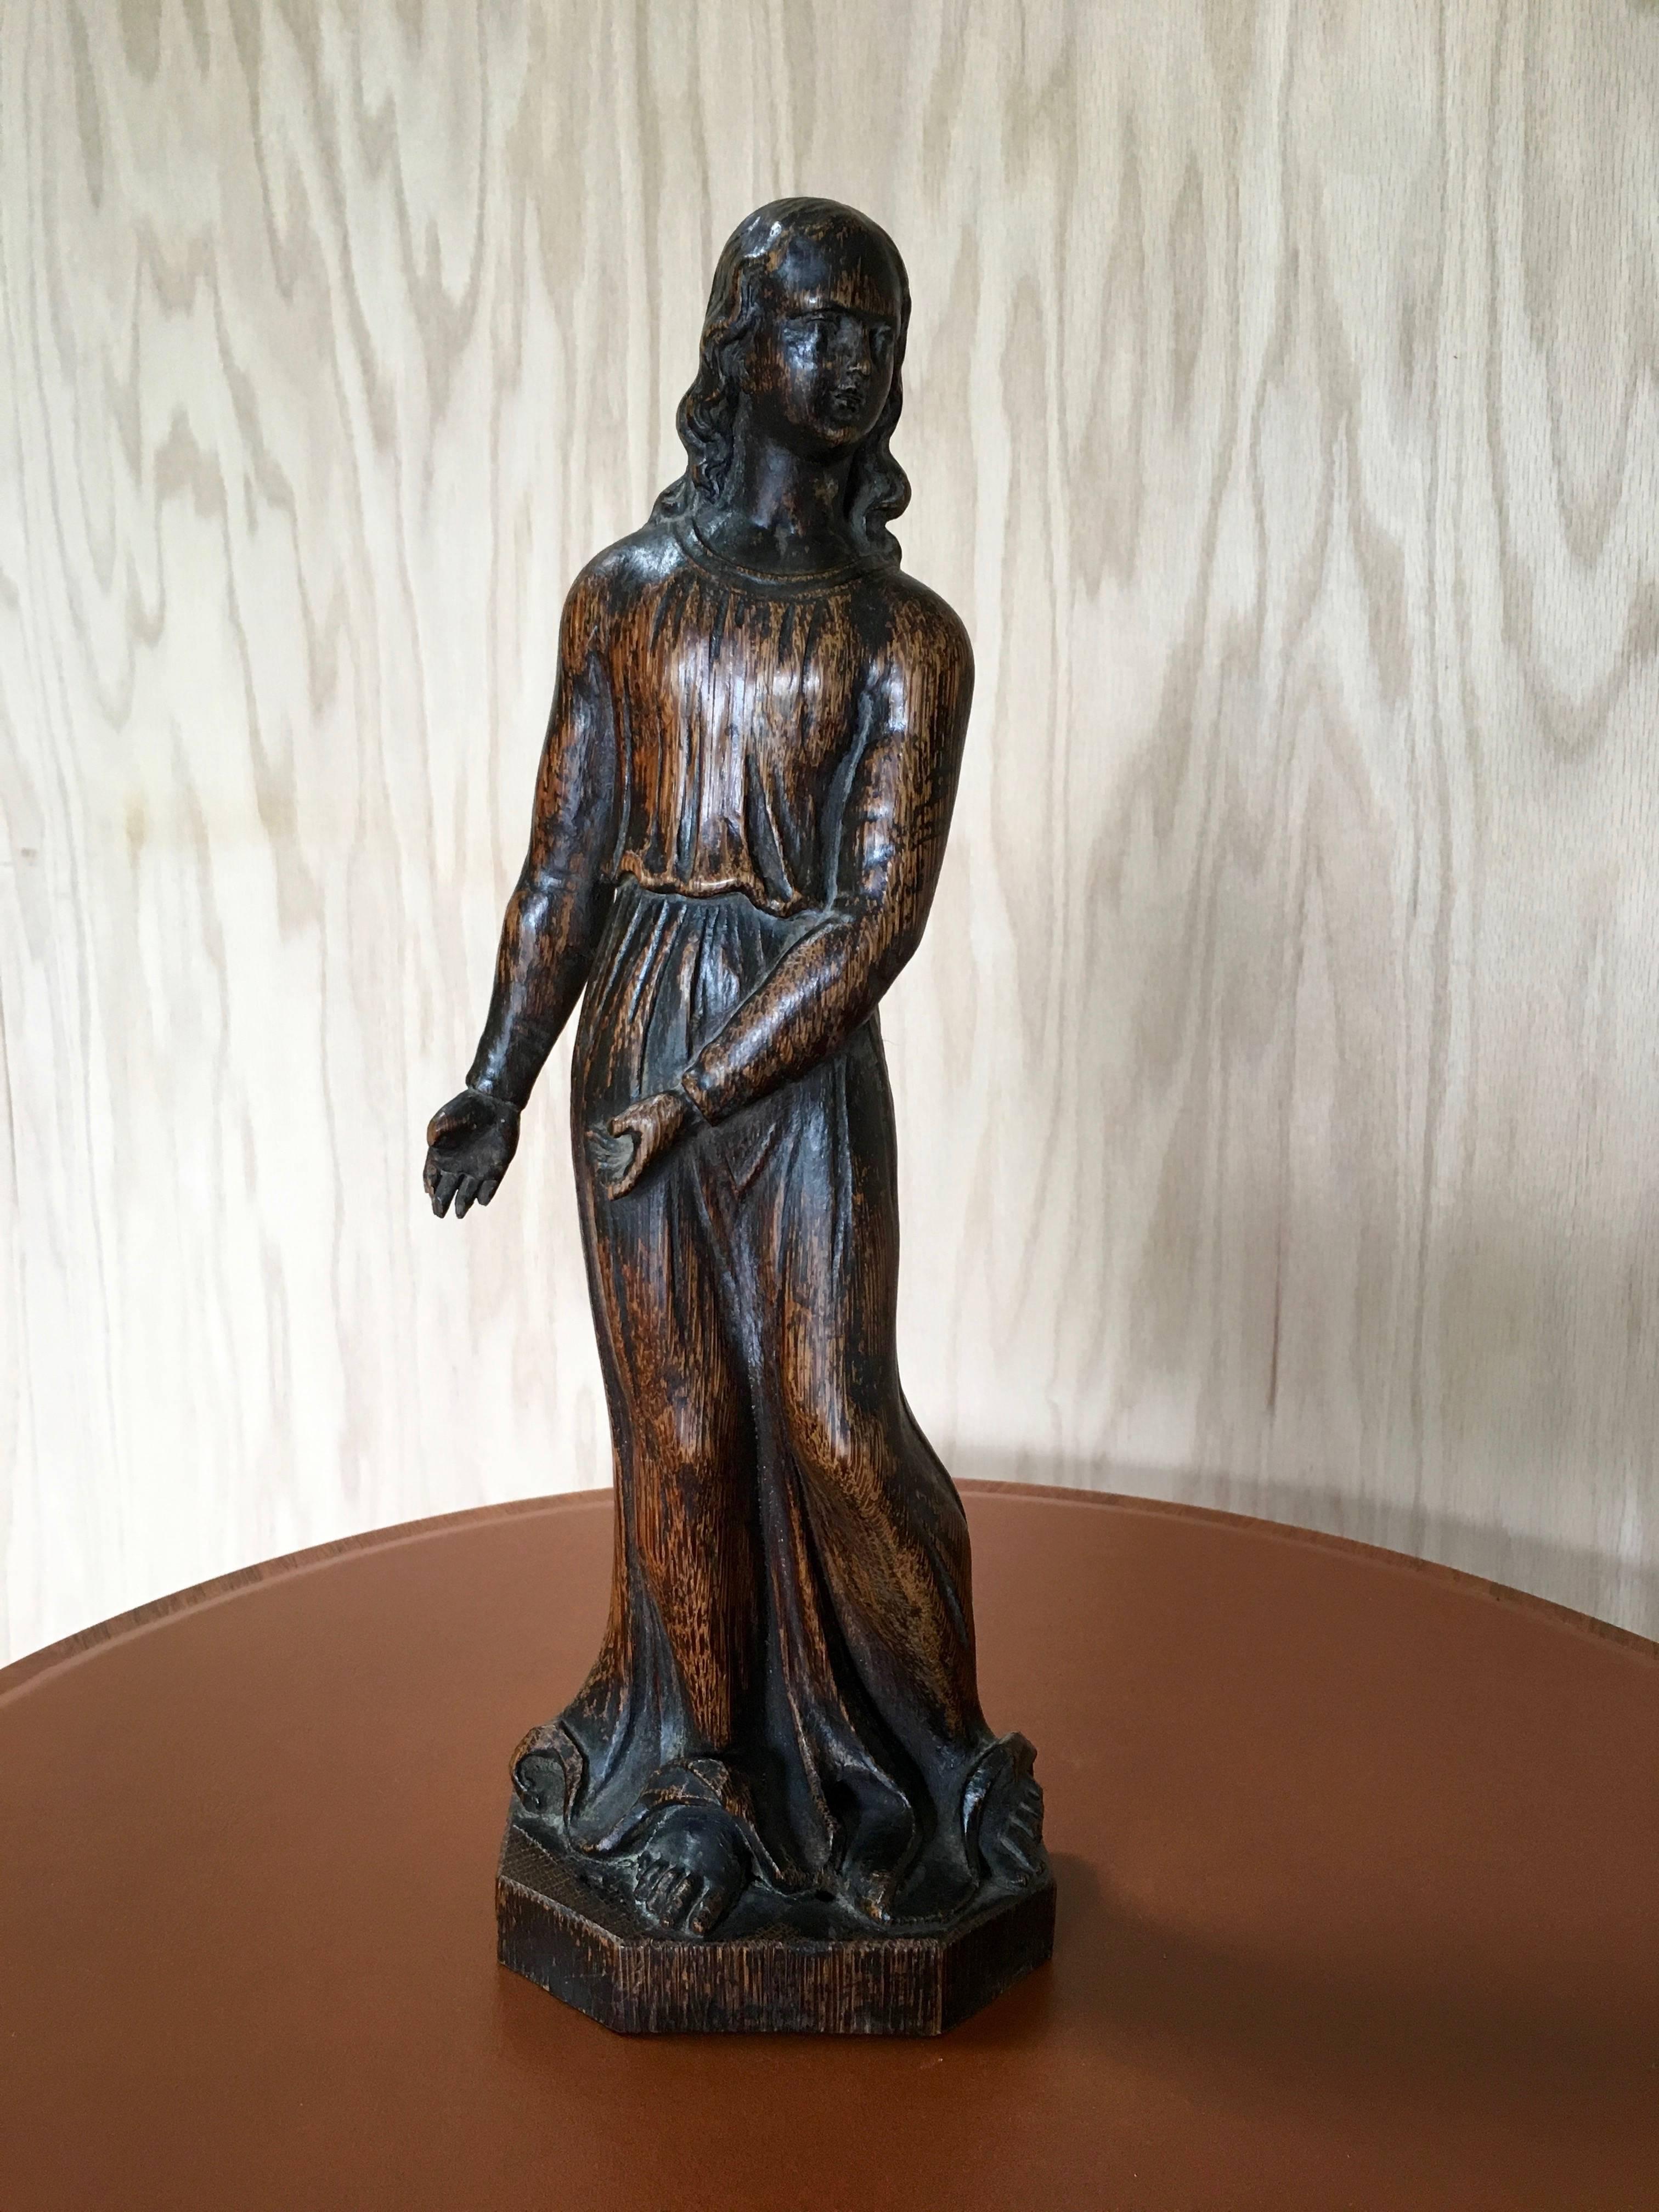 19th century hand-carved statue of a woman sculpture.